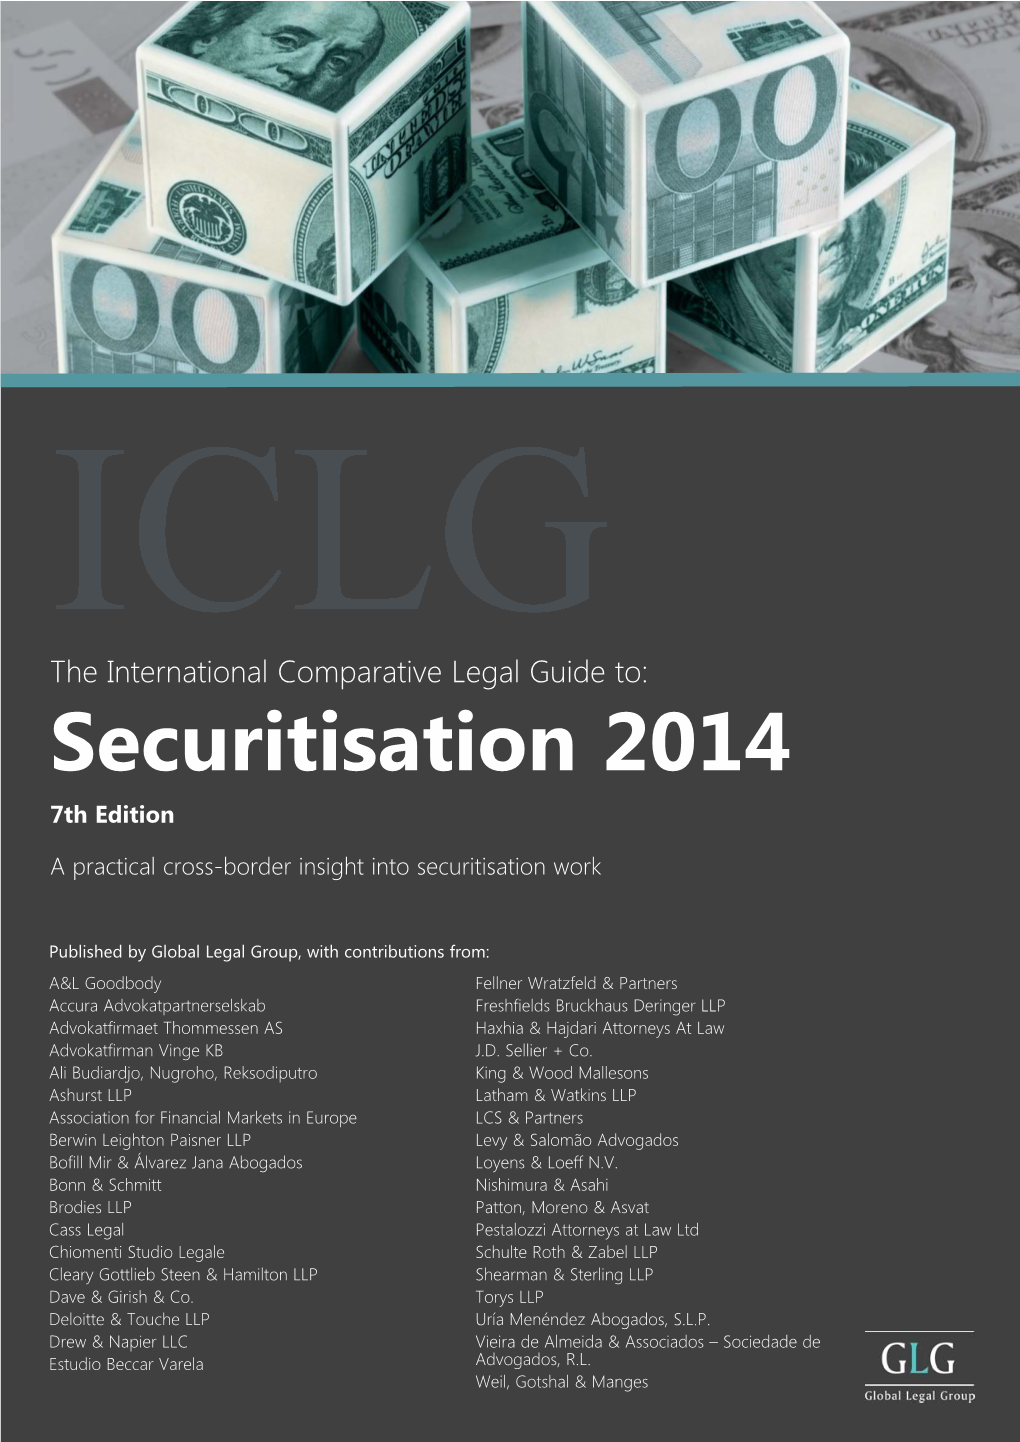 The International Comparative Legal Guide To: Securitisation 2014